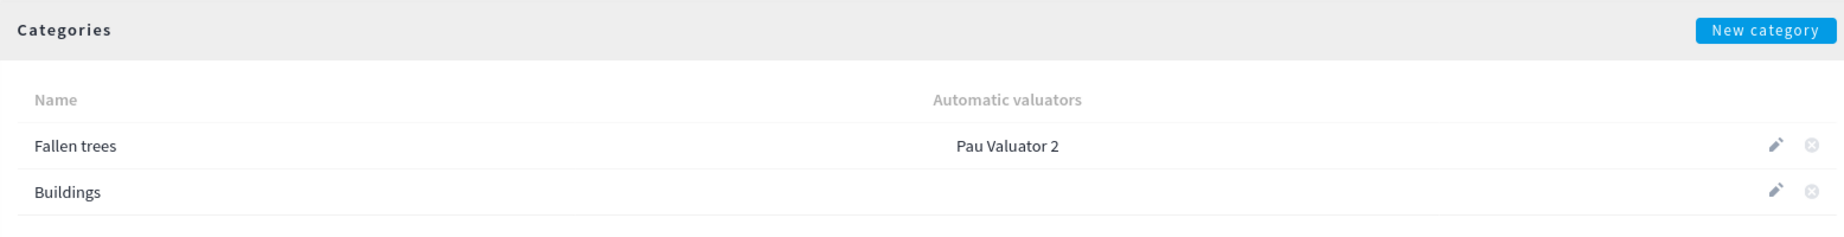 Automatically assign a valuator depending on the category